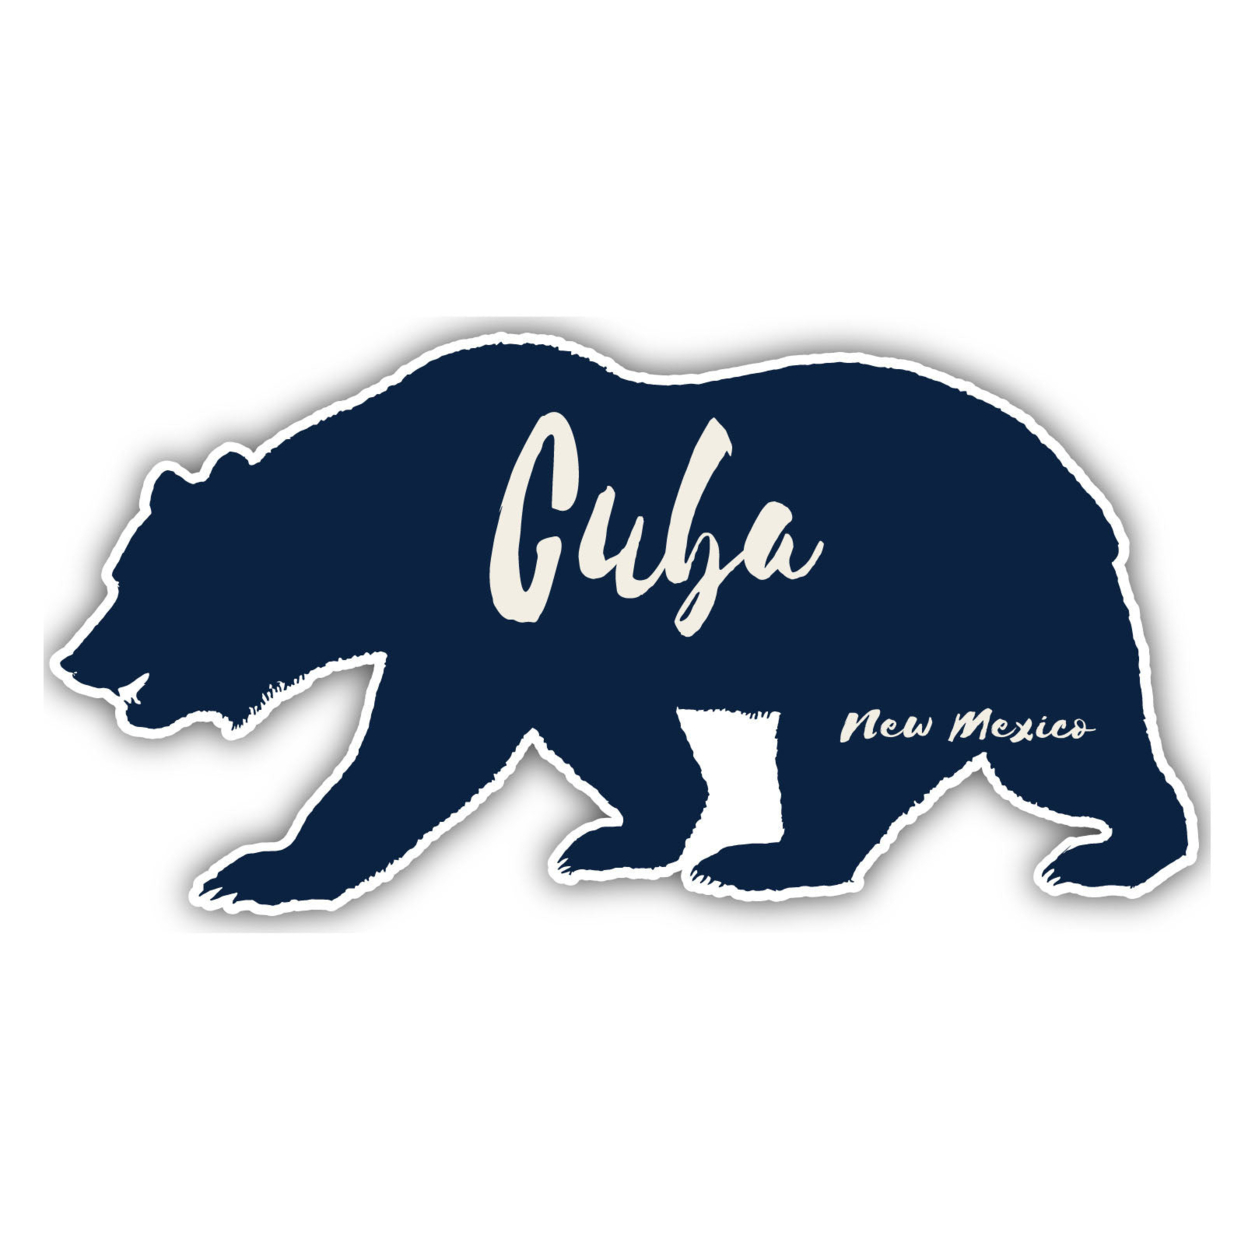 Cuba New Mexico Souvenir Decorative Stickers (Choose Theme And Size) - 4-Pack, 2-Inch, Bear